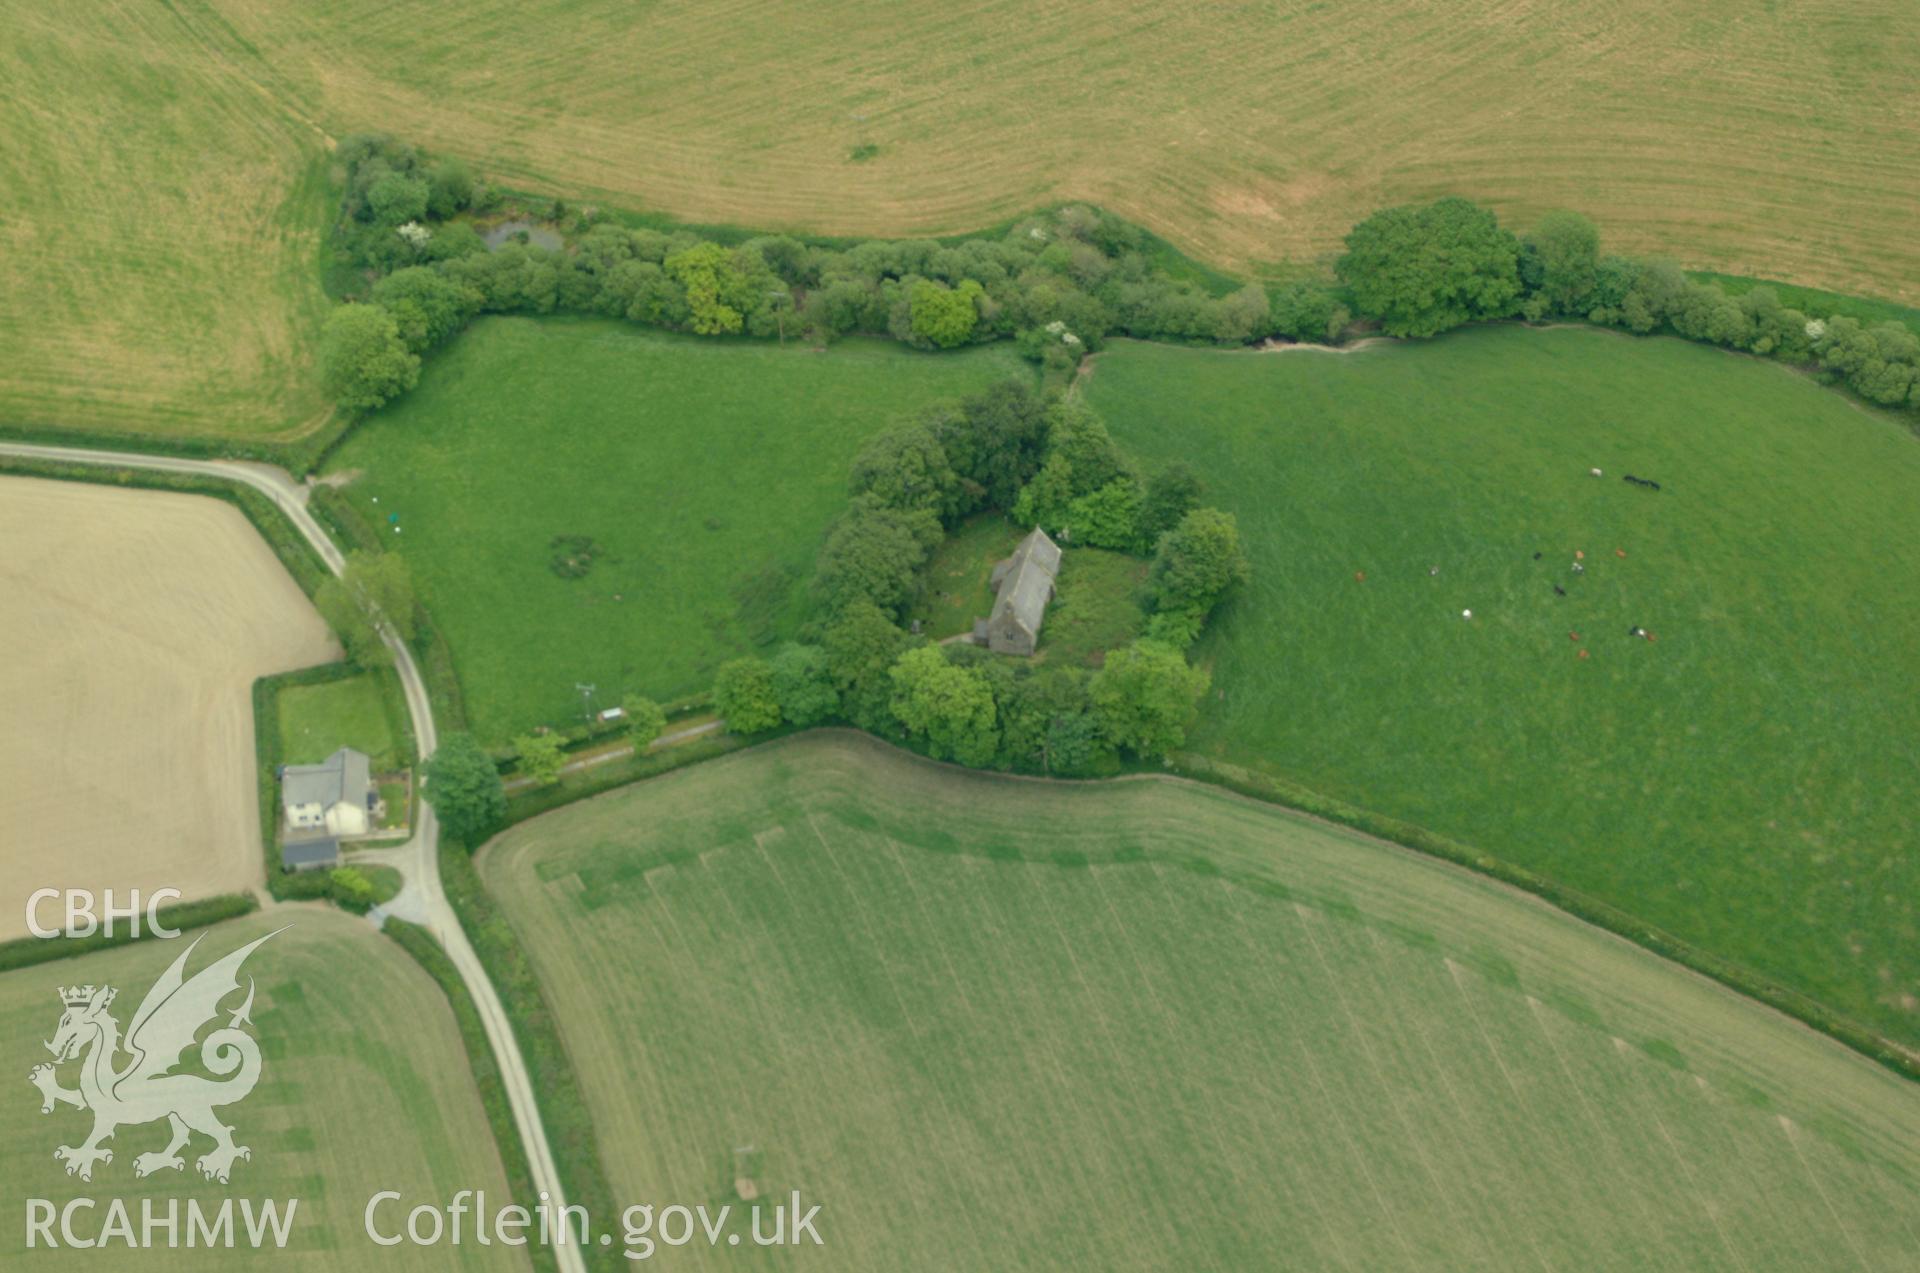 RCAHMW colour oblique aerial photograph of Llangan Church taken on 24/05/2004 by Toby Driver